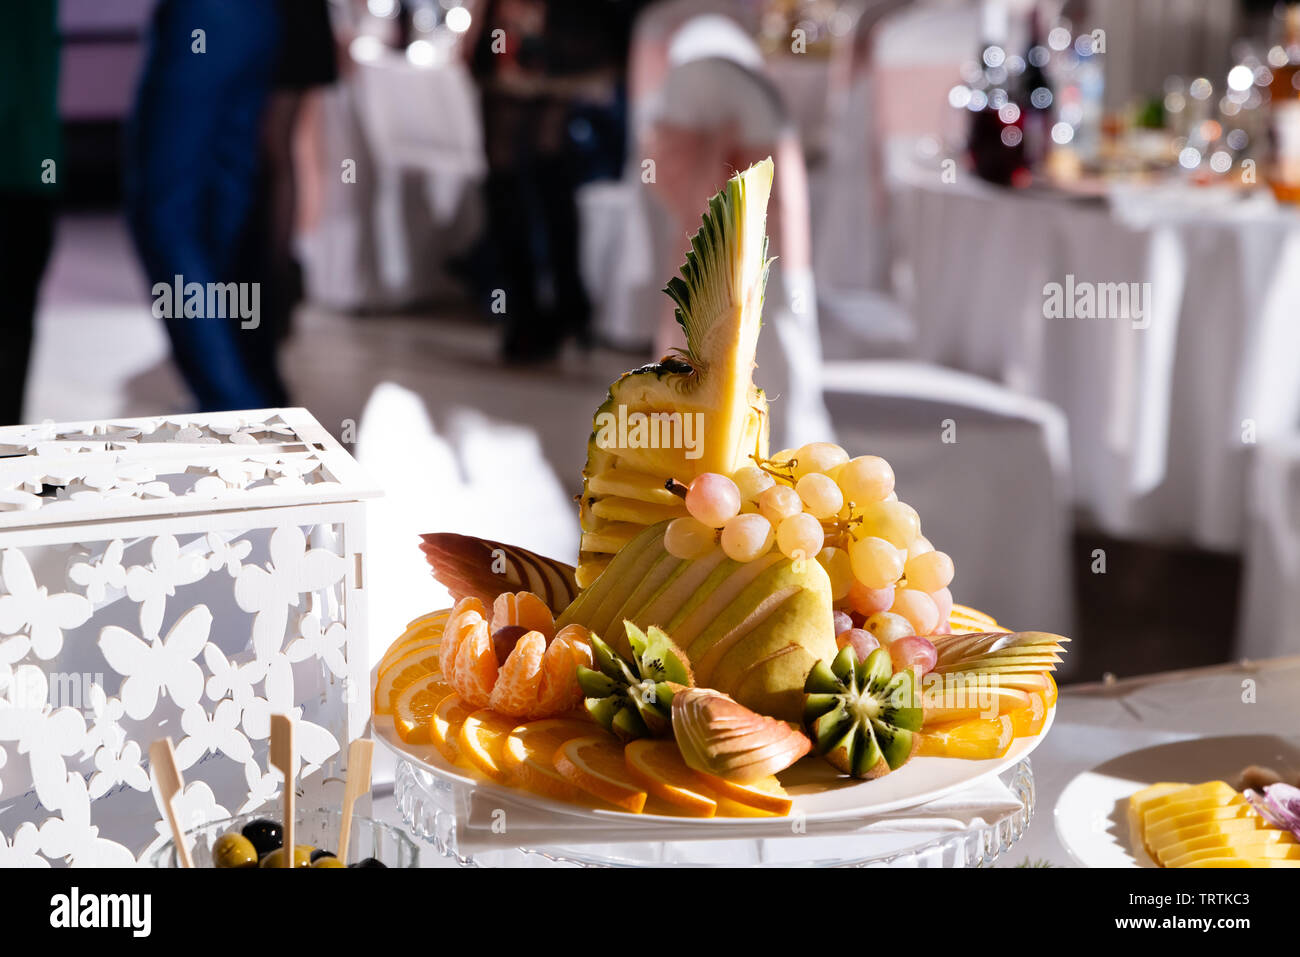 a plate of fresh fruit on the Banquet table in the restaurant Stock Photo